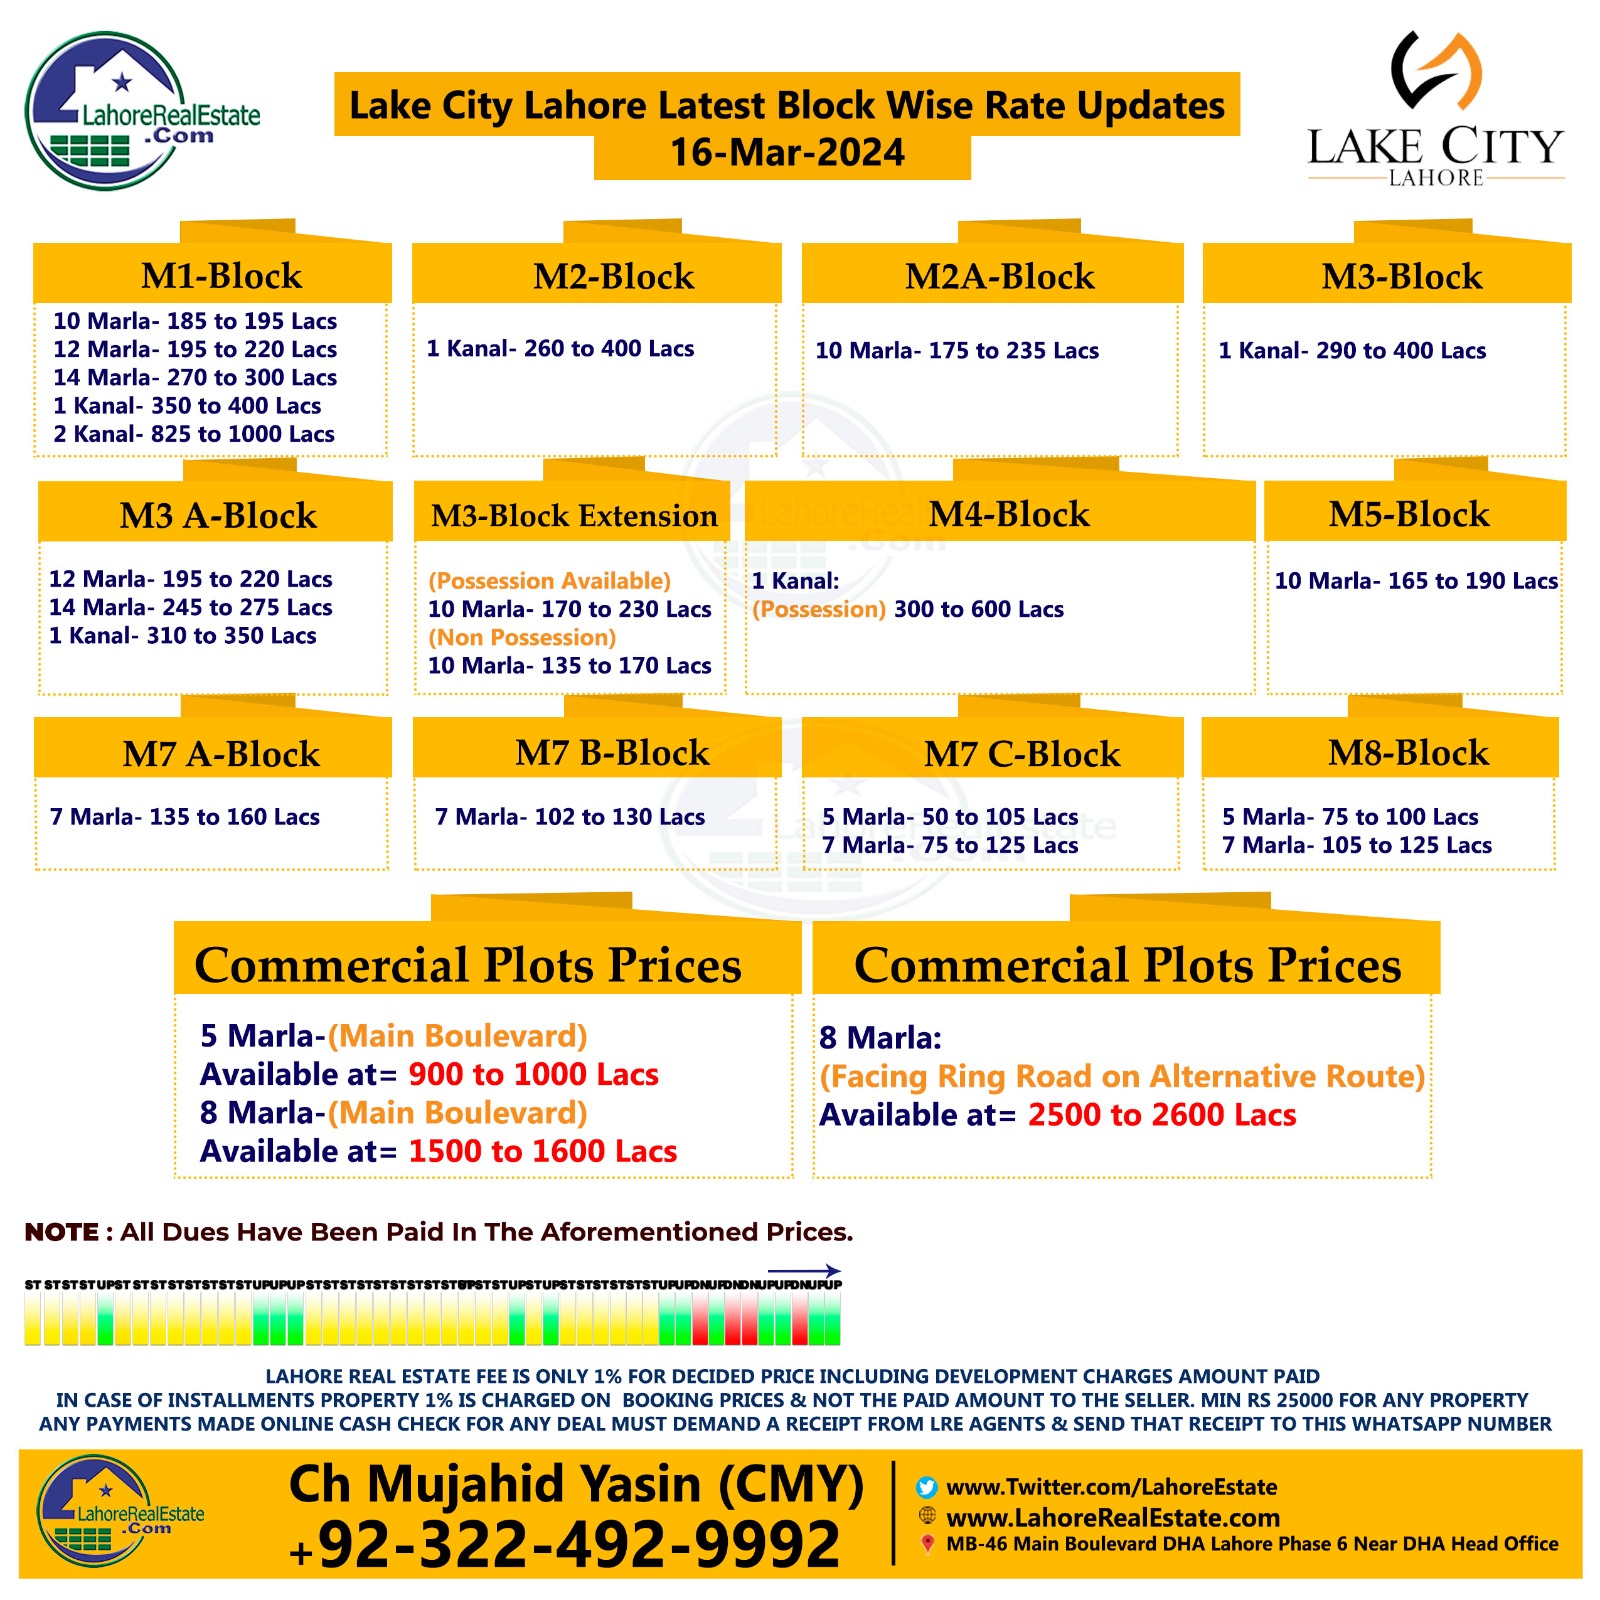 Lake City Lahore Plot Prices Update March 21, 2024